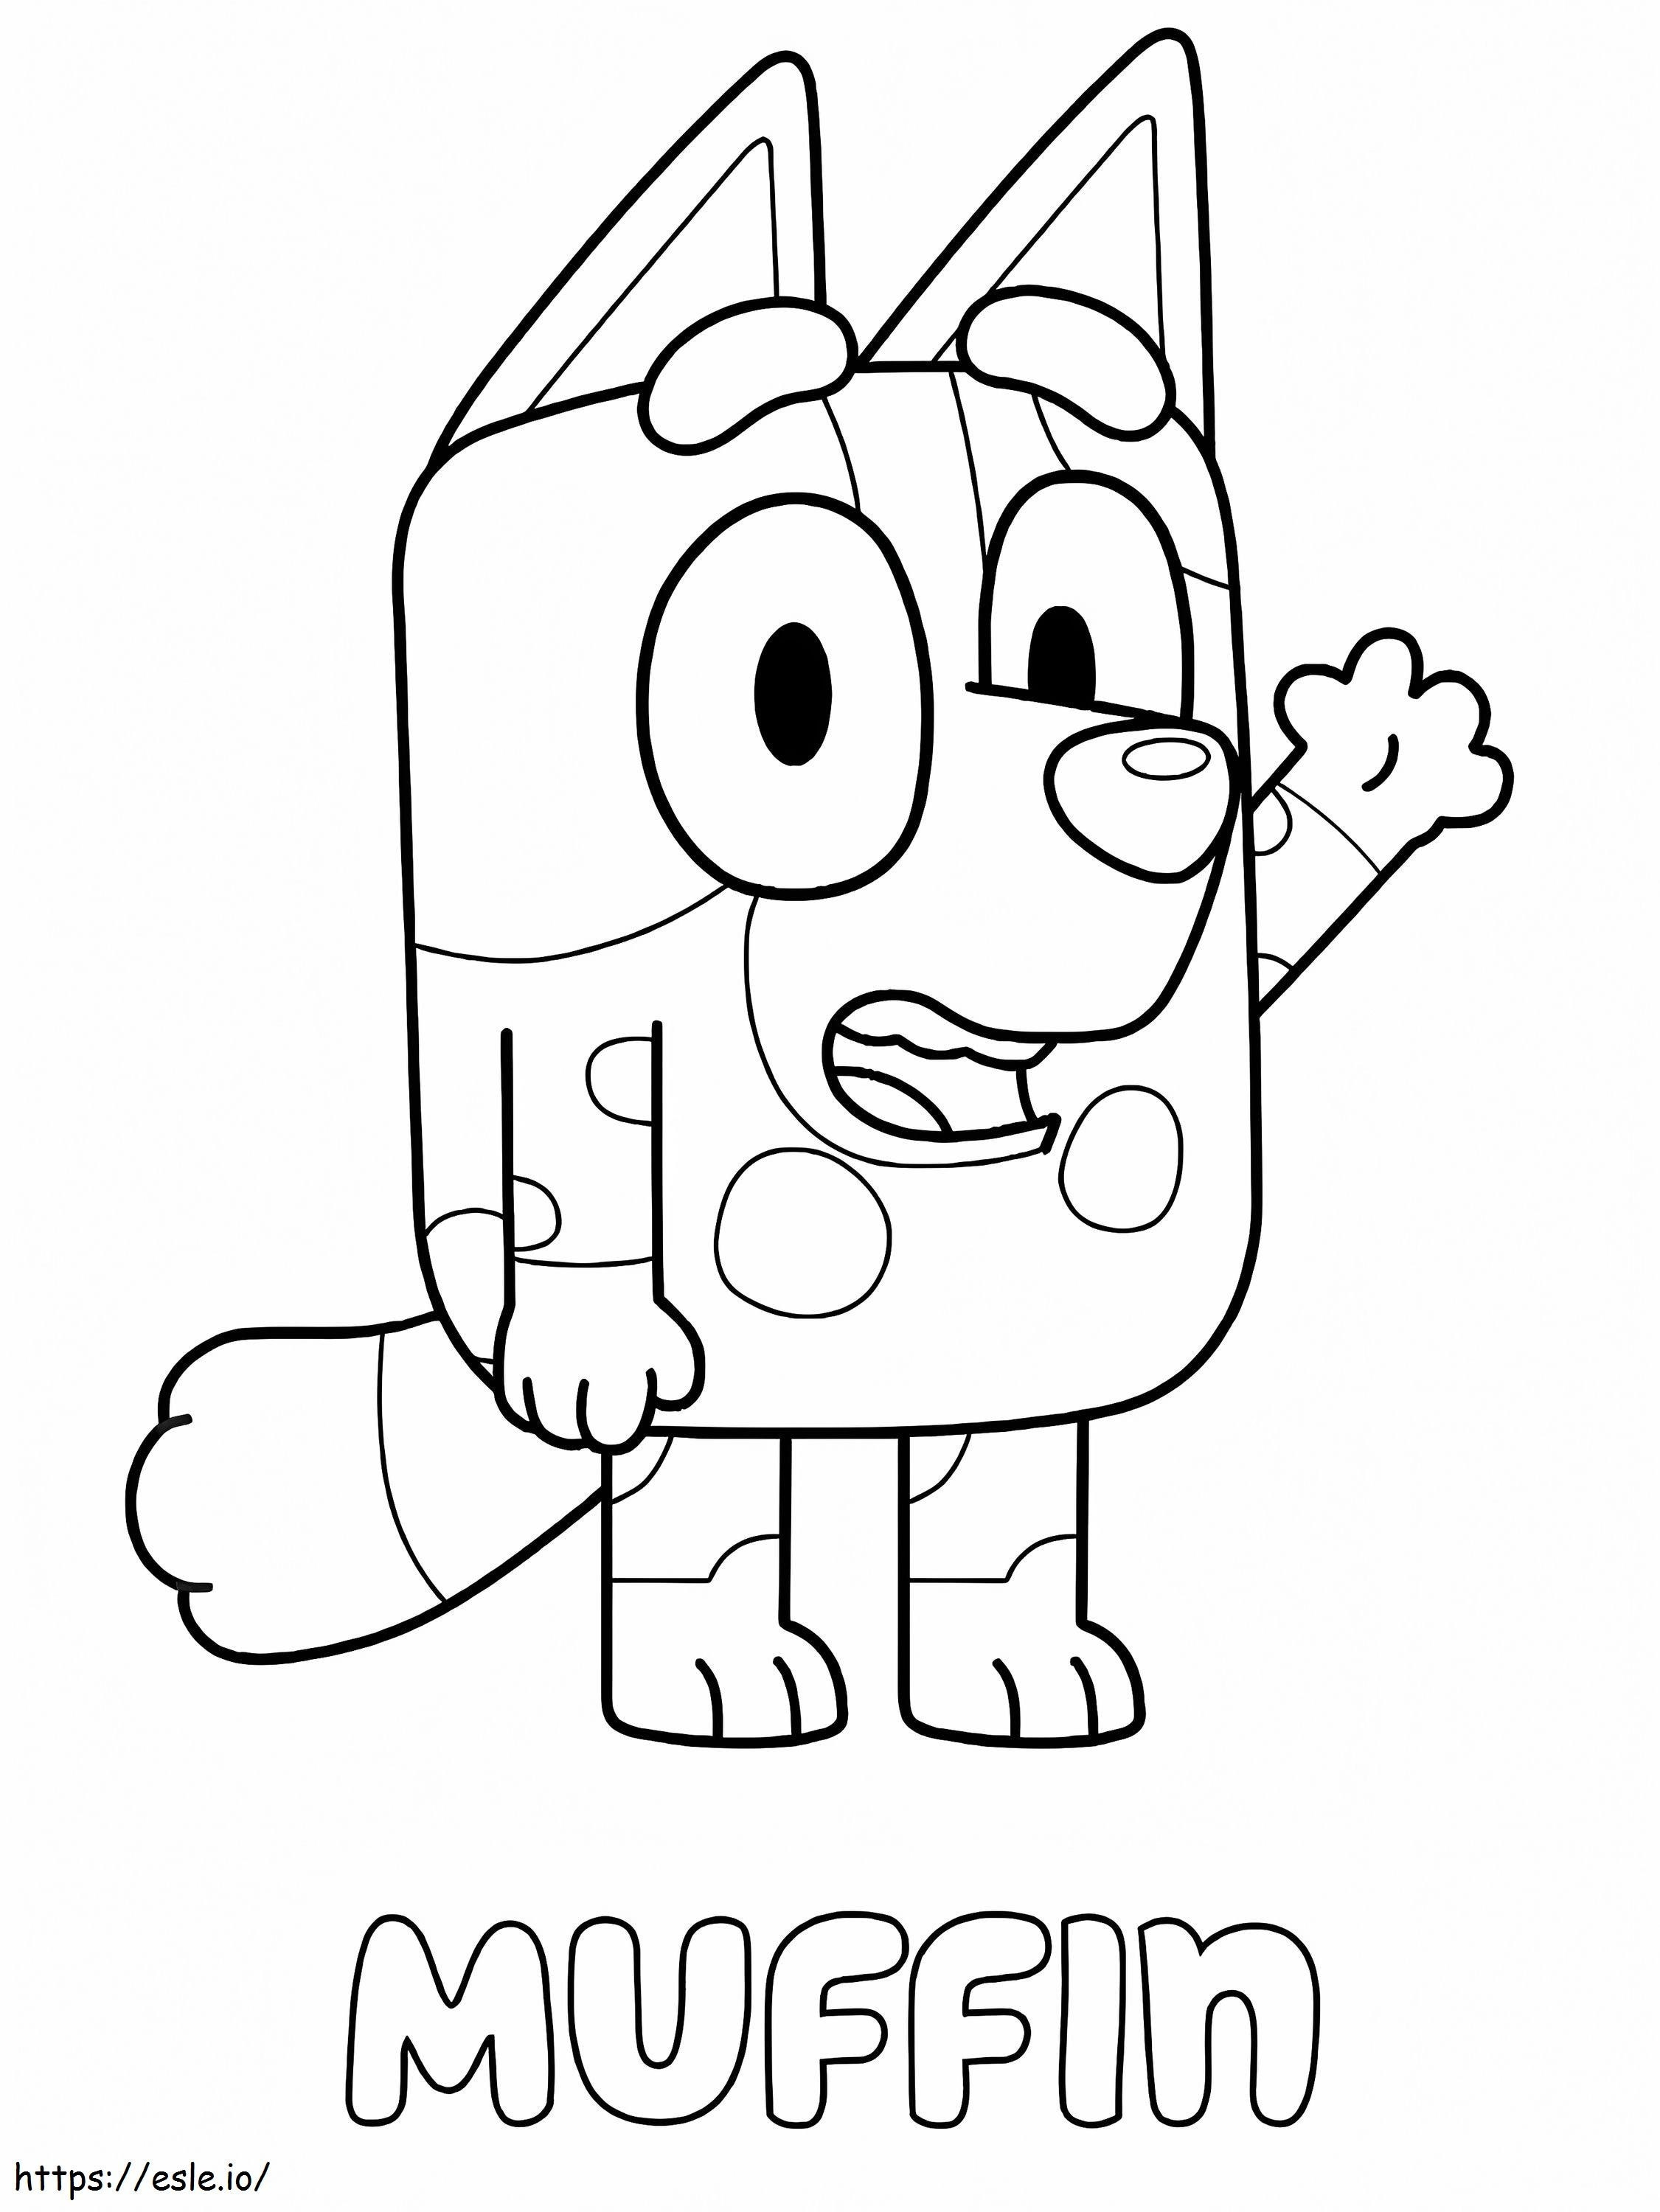 1591580872 Bsssdsagag coloring page